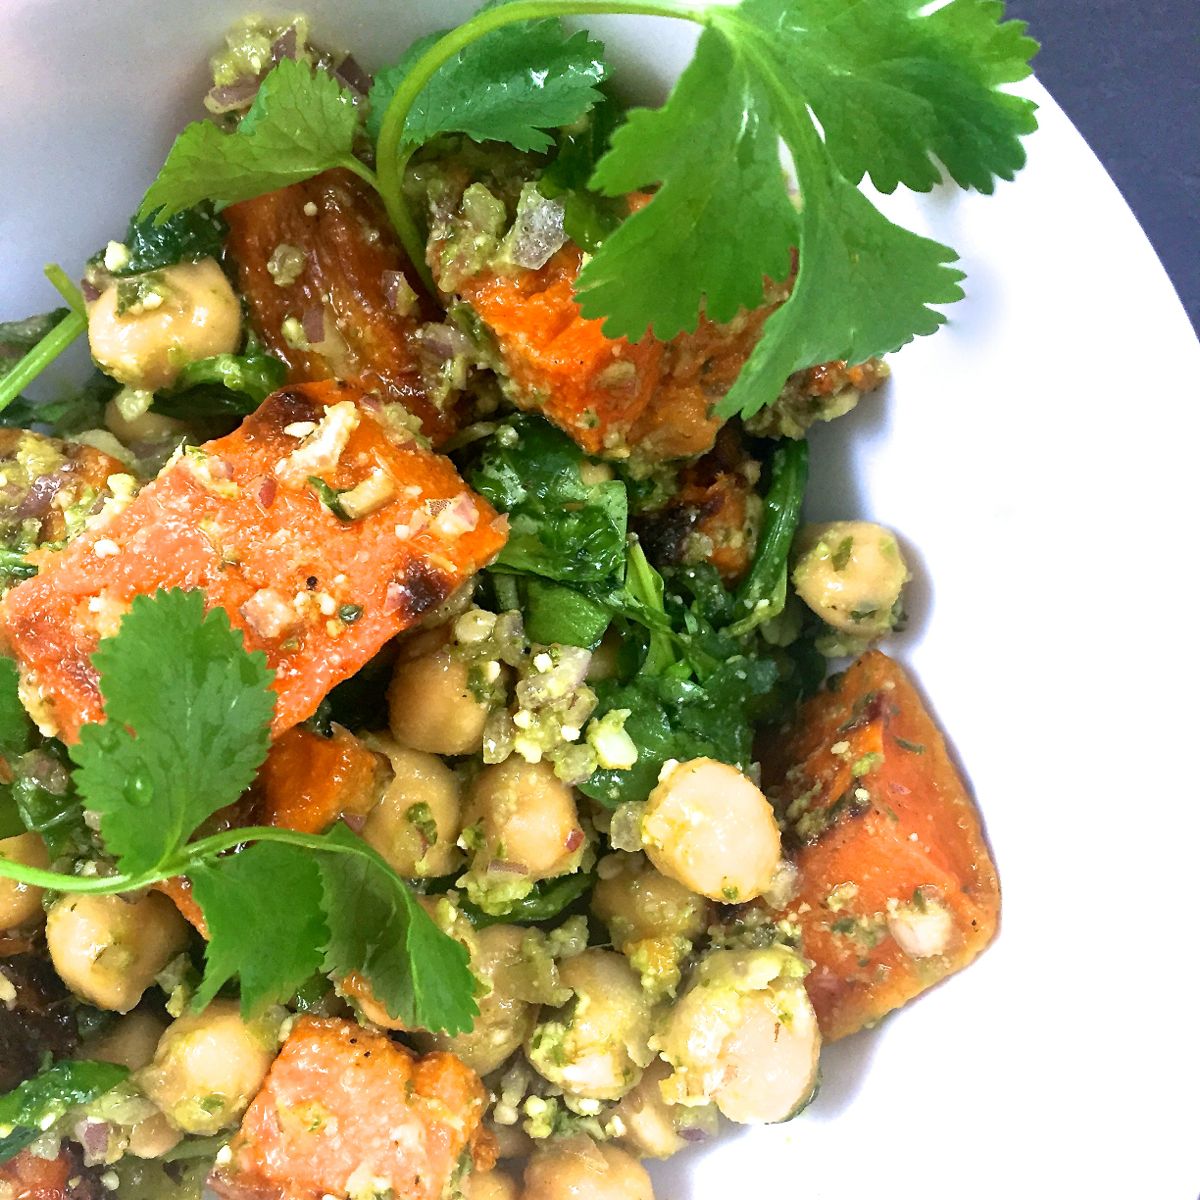 roasted butternut squash and chickpea salad :: by radish*rose